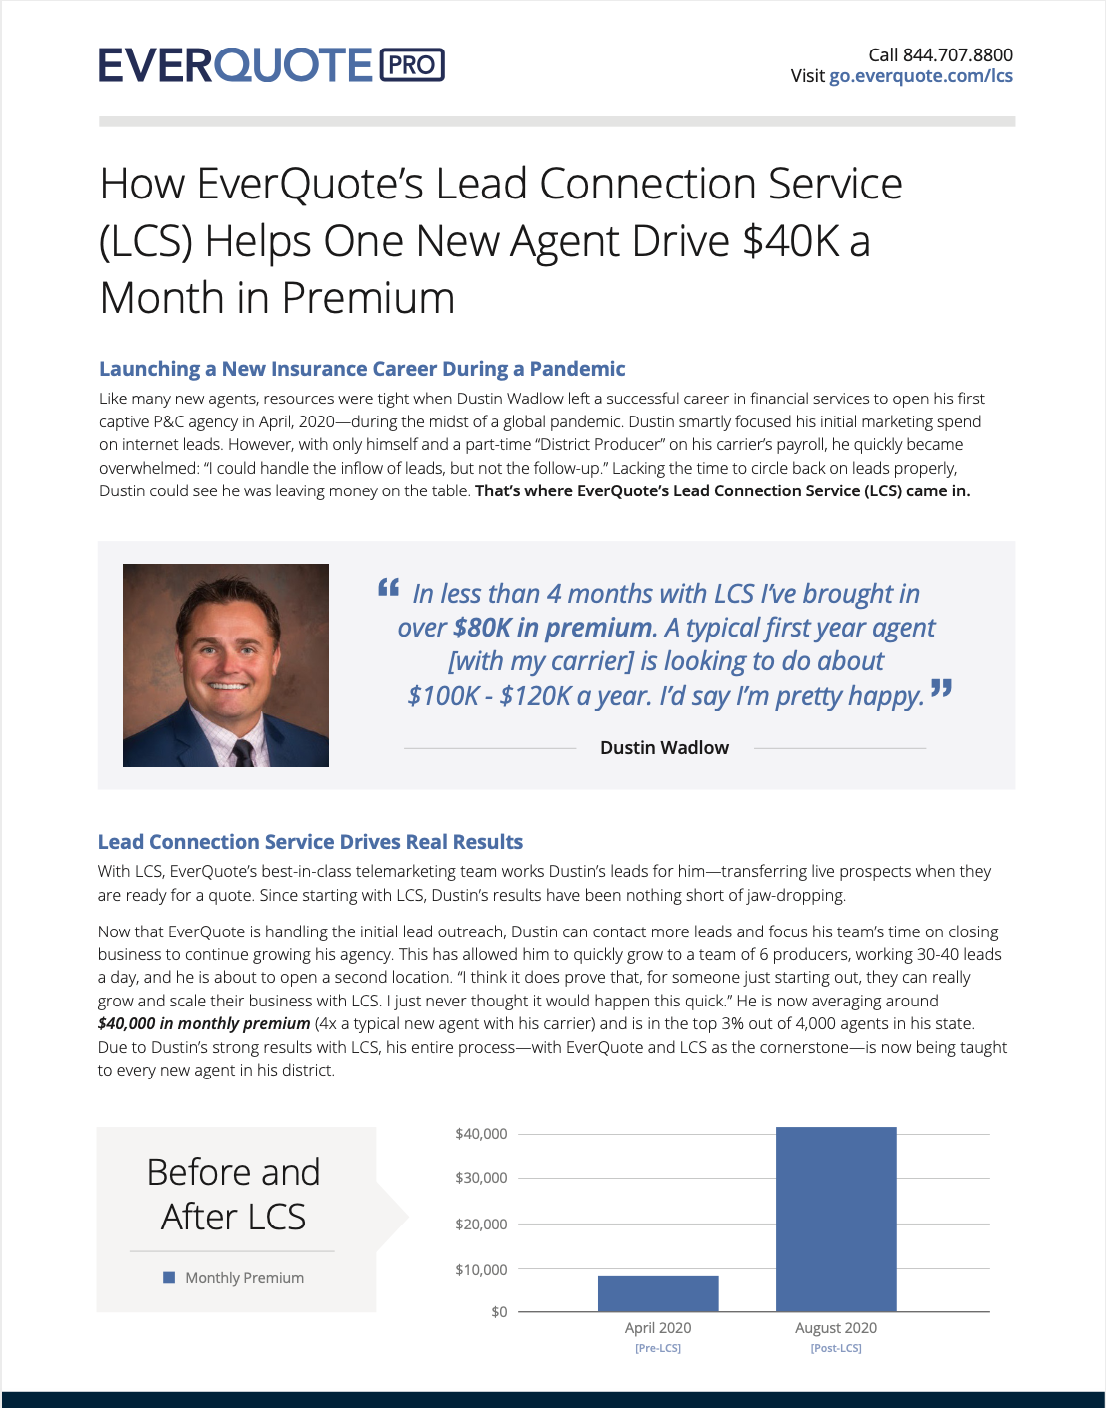 EverQuote's Lead Connection Service (LCS) Helped Drive $40,000 More A Month In Premium, Learn How